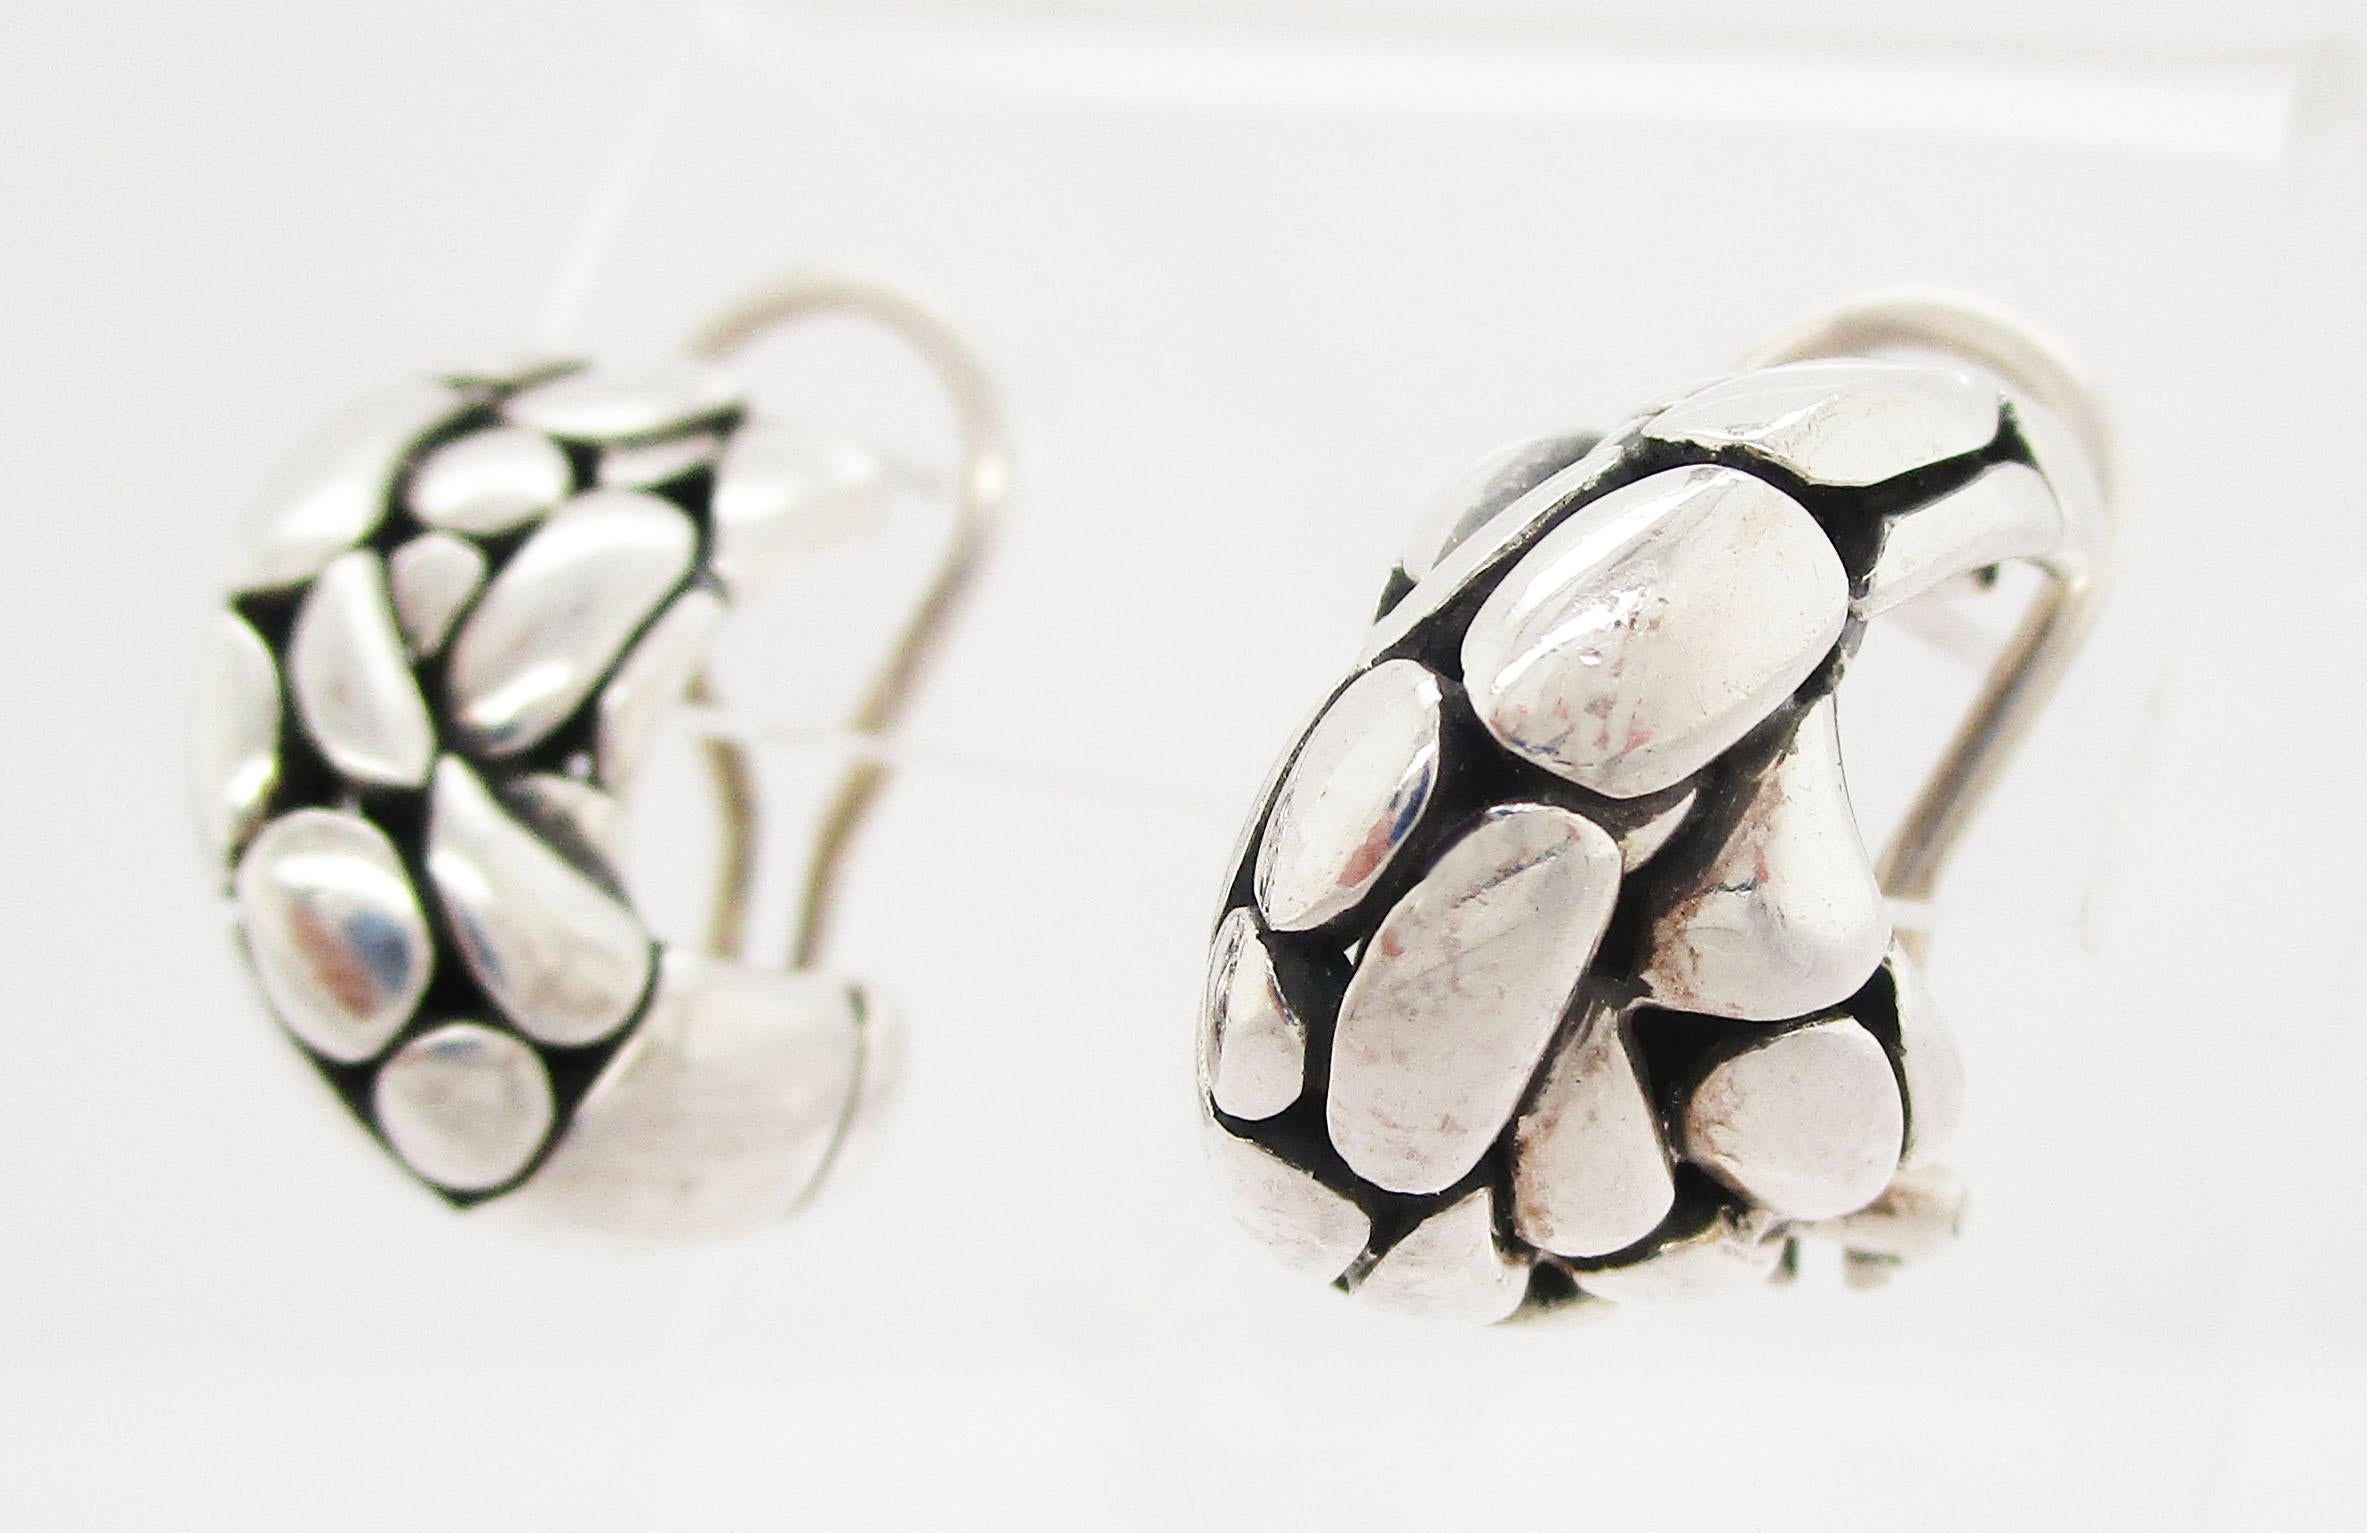 These are a gorgeous pair of vintage John Hardy earrings in sterling silver with a classic balonesian look. The twisted design makes these earrings comfortable, but the textured, dramatic black and silver look makes them impossible to miss! These